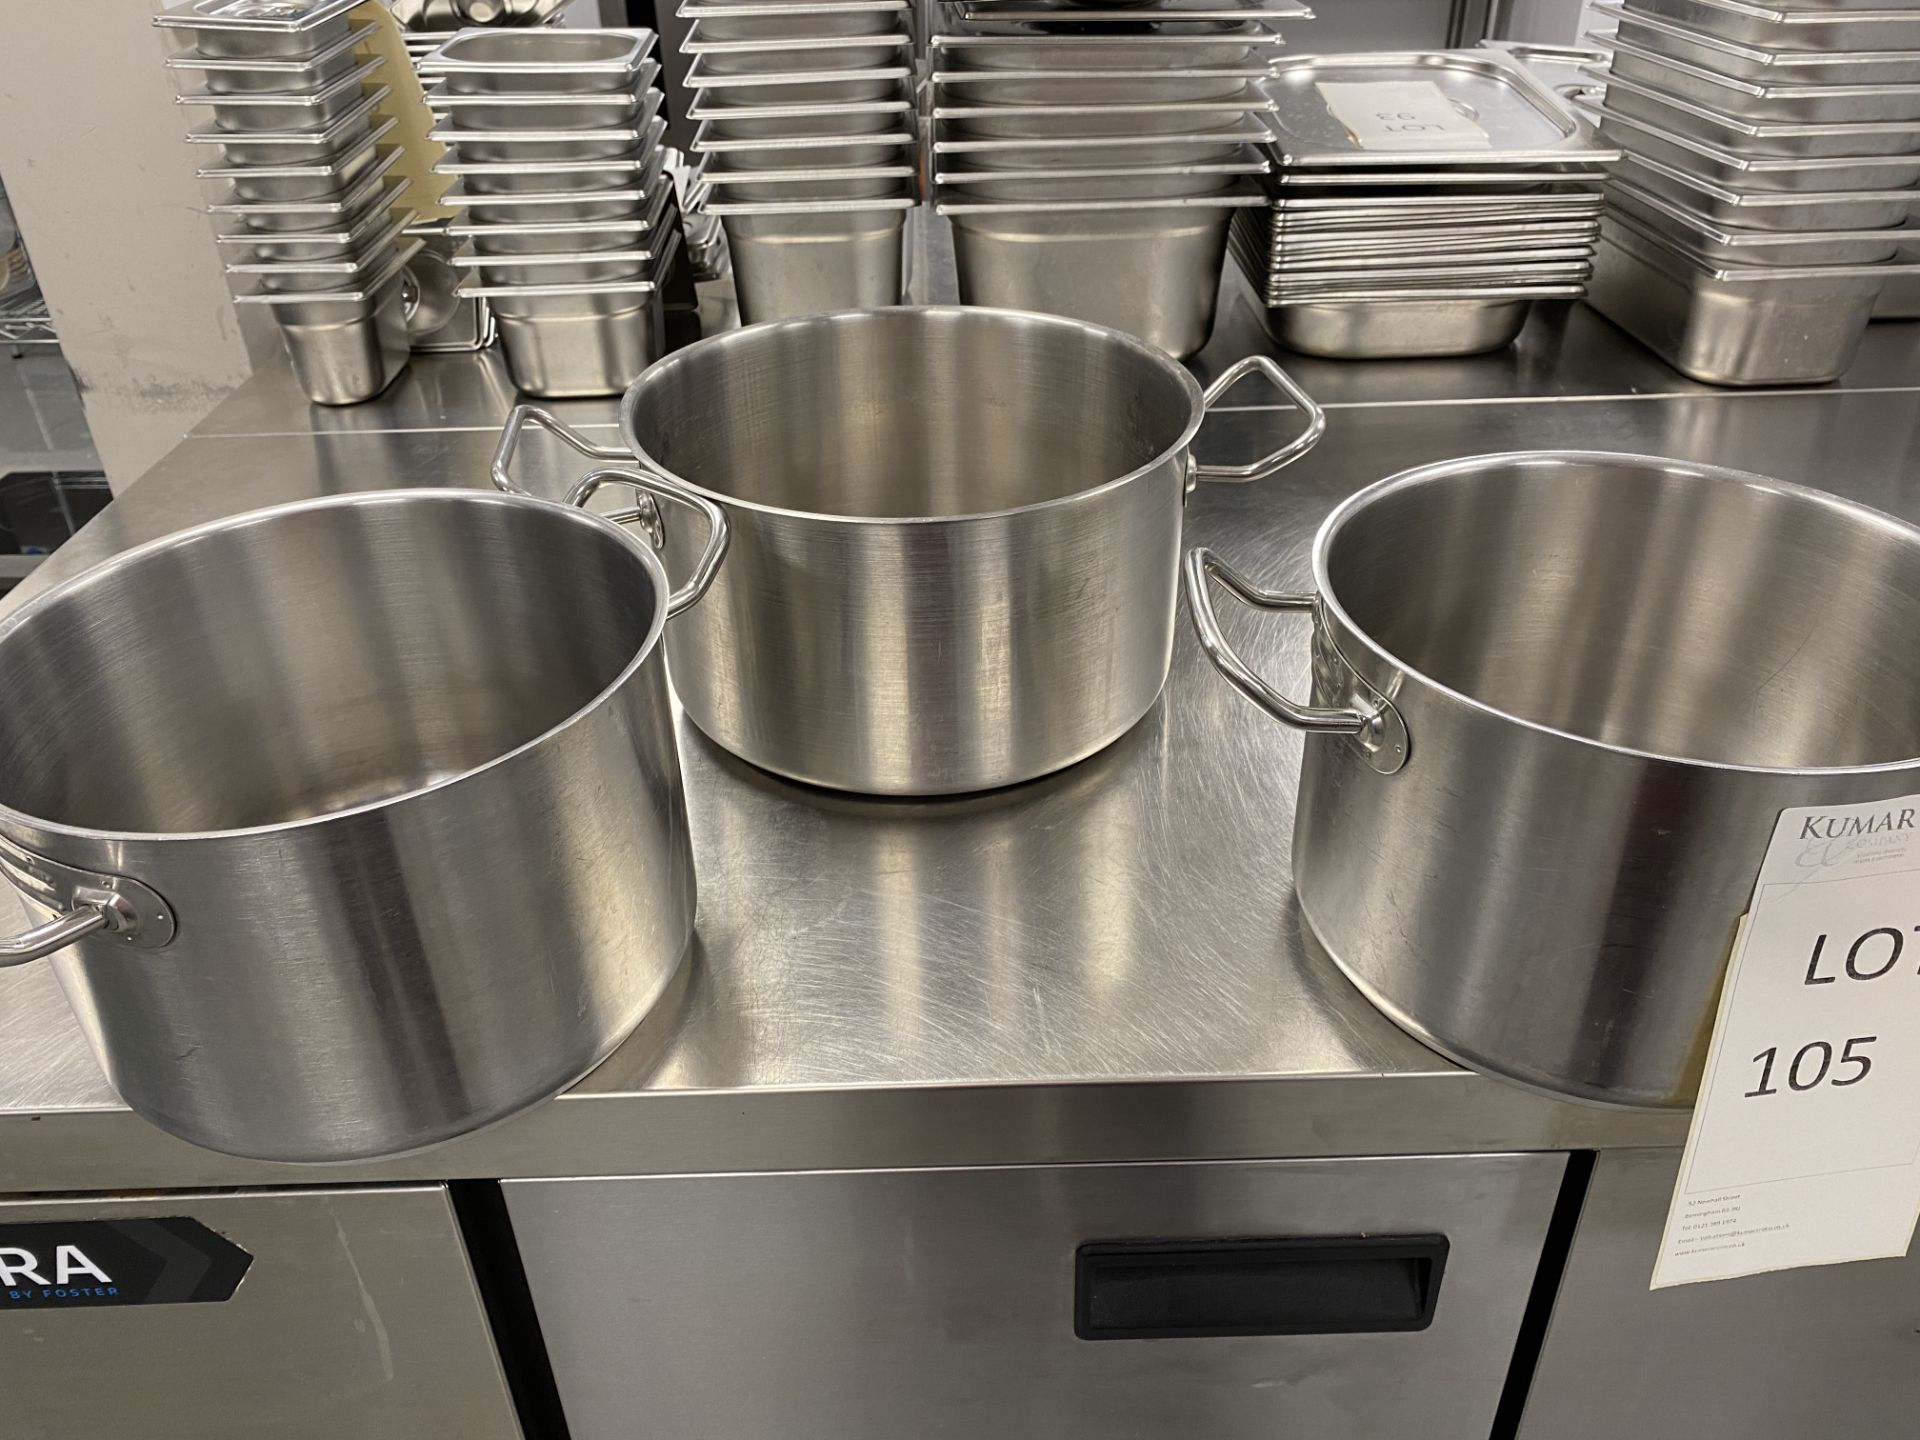 Set of 3 Stainless Steel Stock Pots, Assorted Sizes